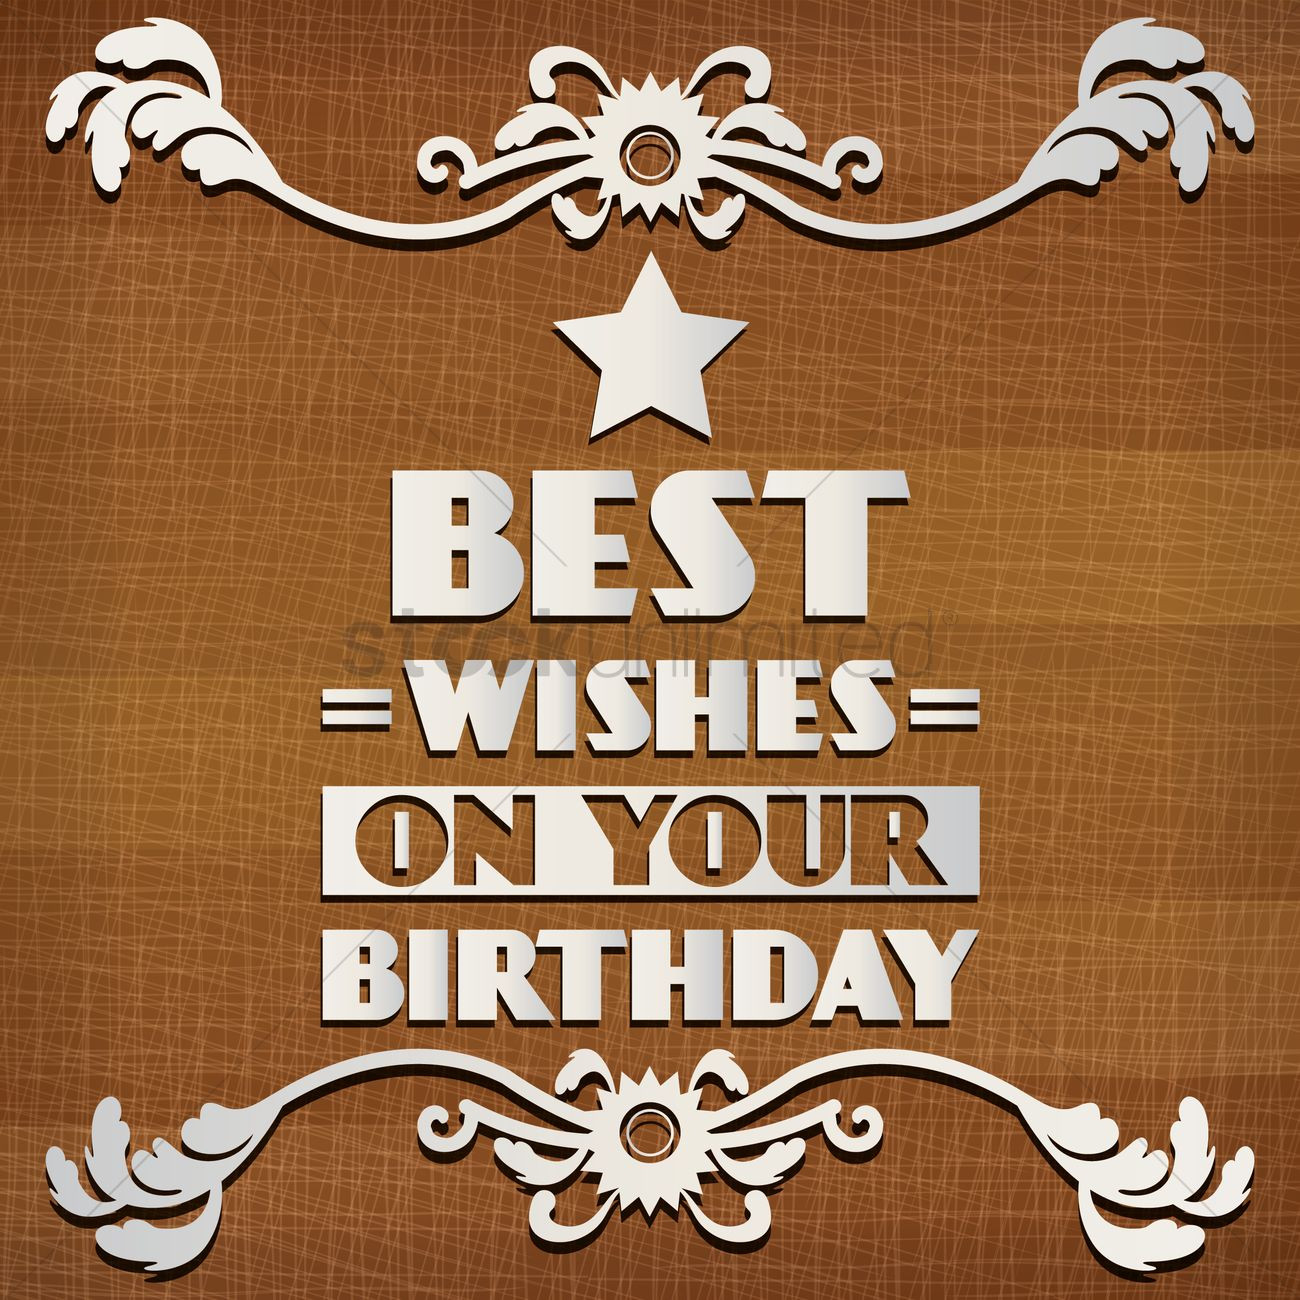 Best Wishes For Your Birthday
 Best wishes on your birthday Vector Image